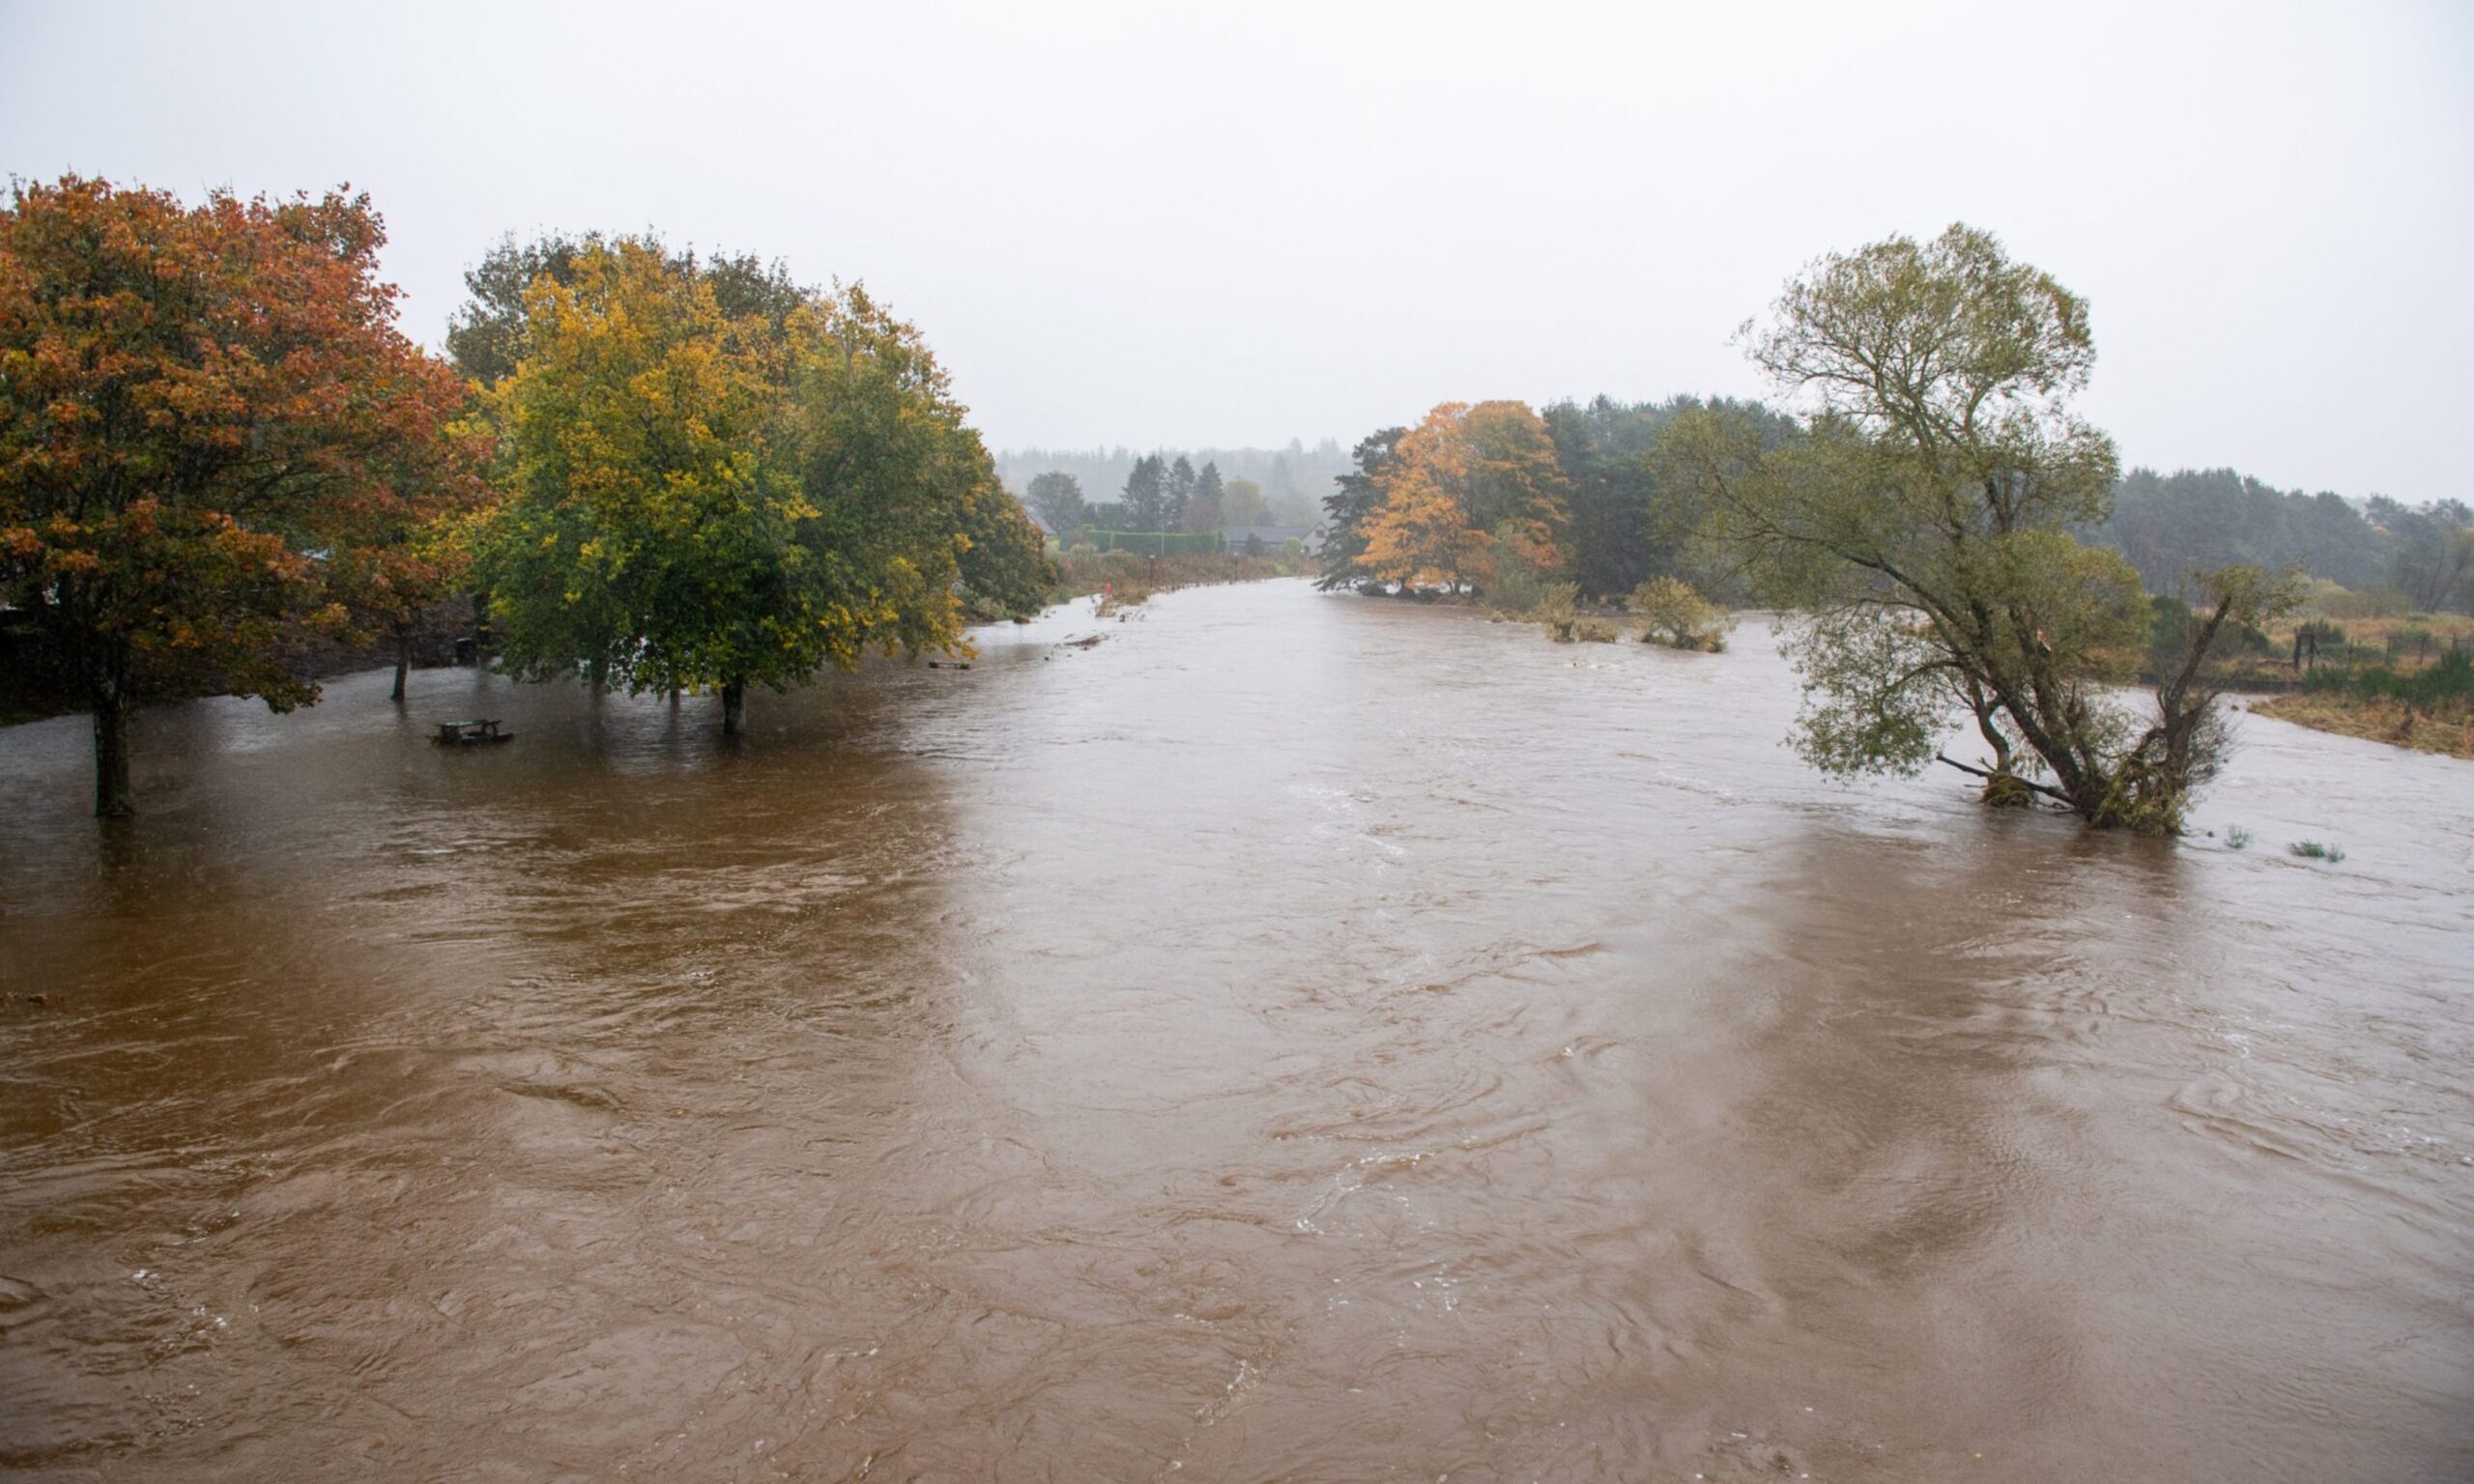 The River Don at Inverurie has burst its banks. Image: Kami Thomson/DC Thomson